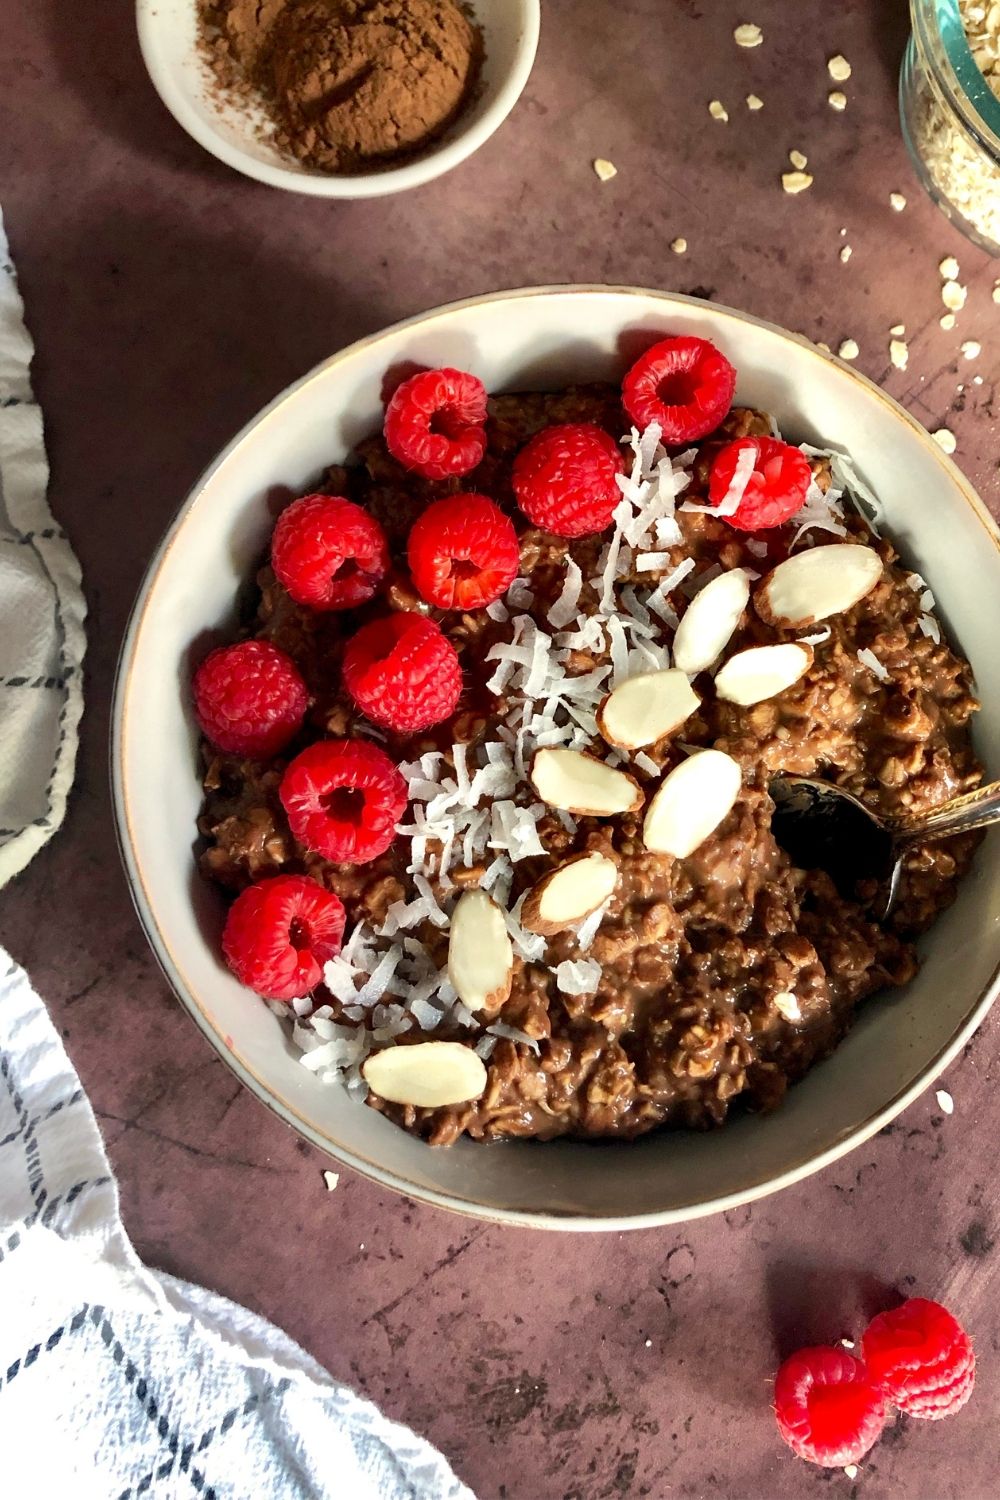 a bowl of chocolate oatmeal garnished with raspberries, coconut flakes, and sliced almonds